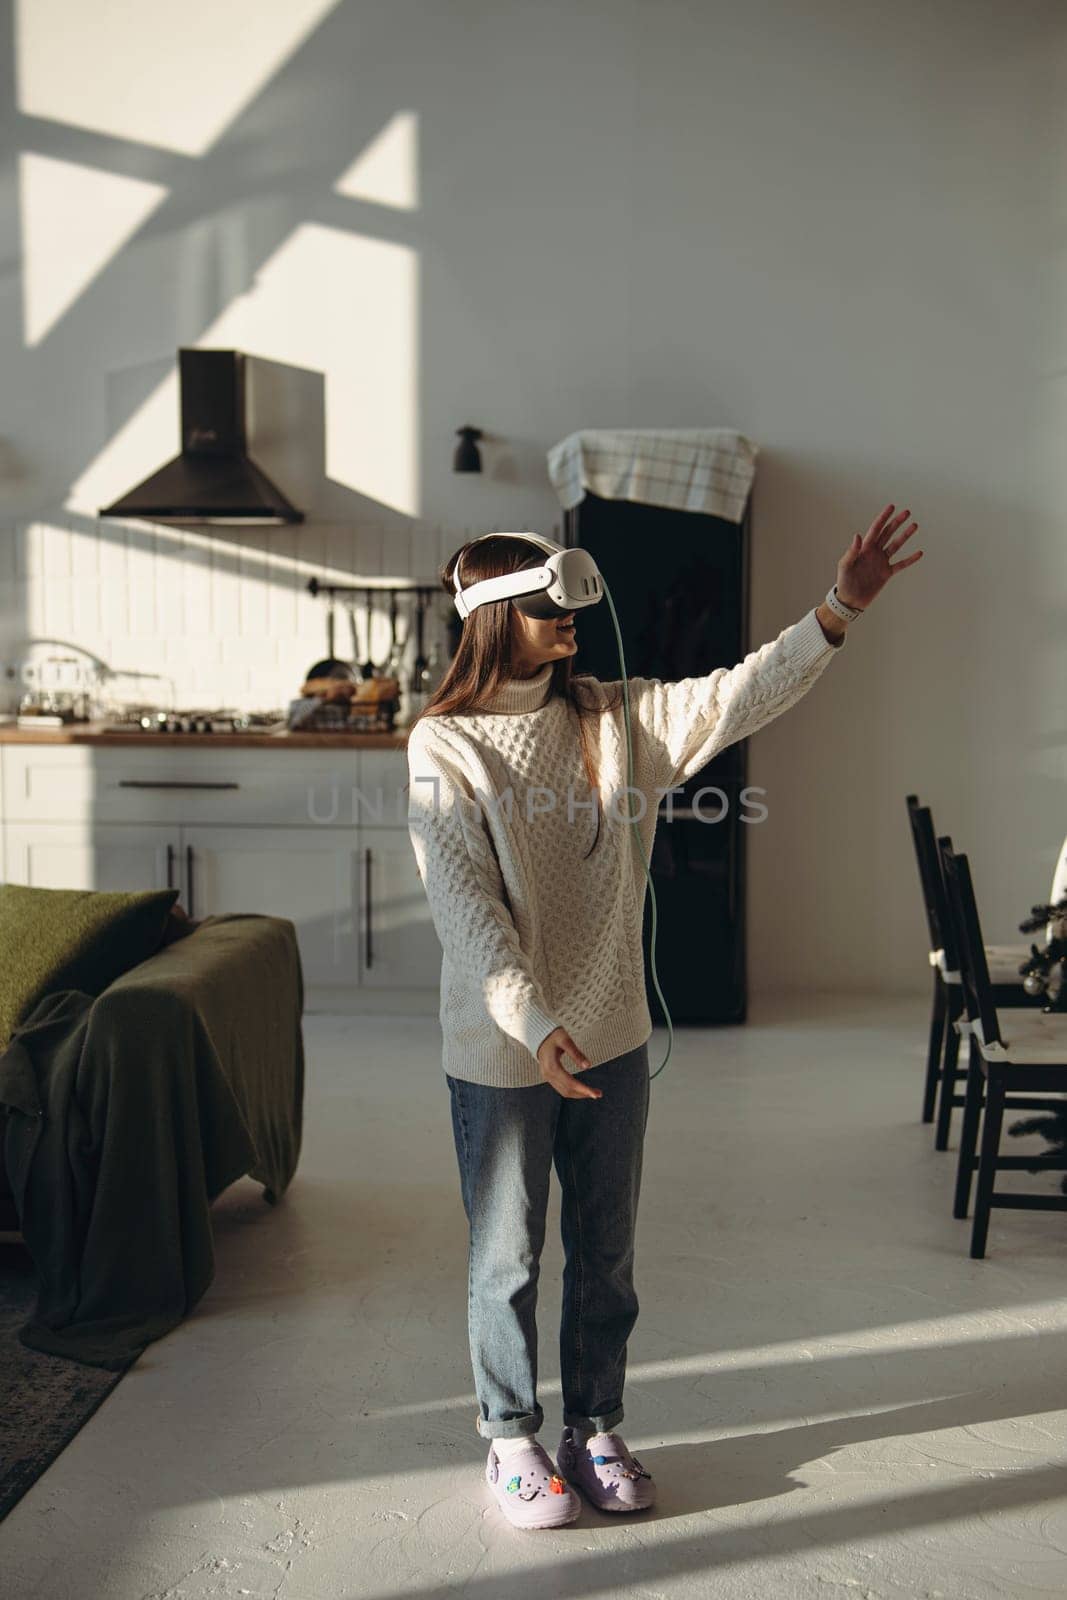 Playing an online game, a lovely young lady enjoys her VR headset in the apartment. High quality photo